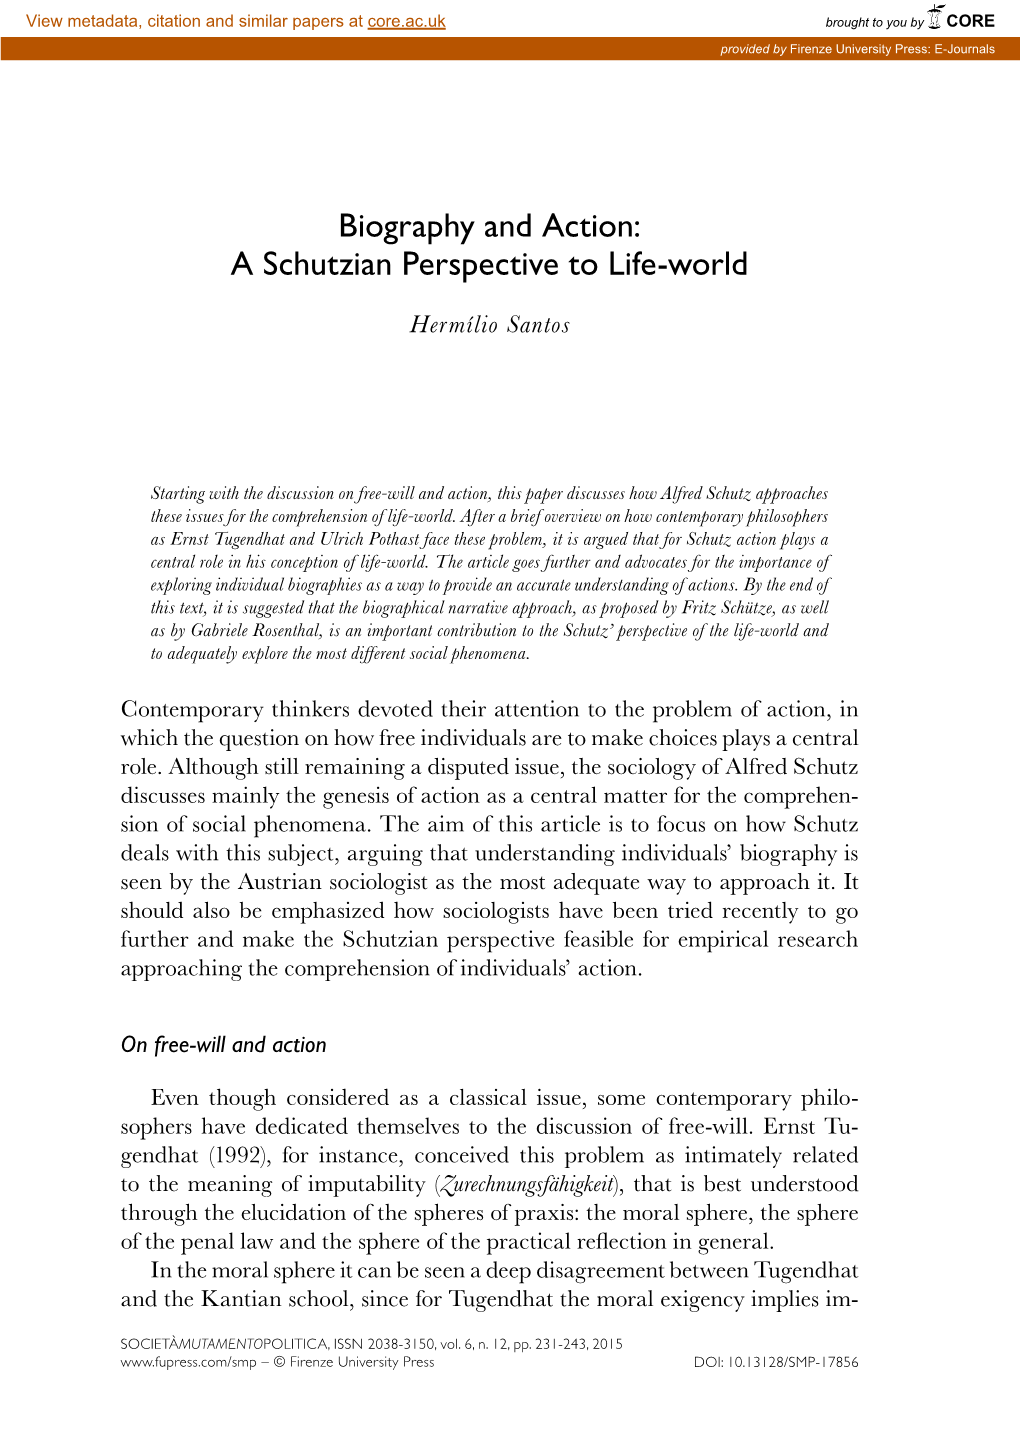 Biography and Action: a Schutzian Perspective to Life-World